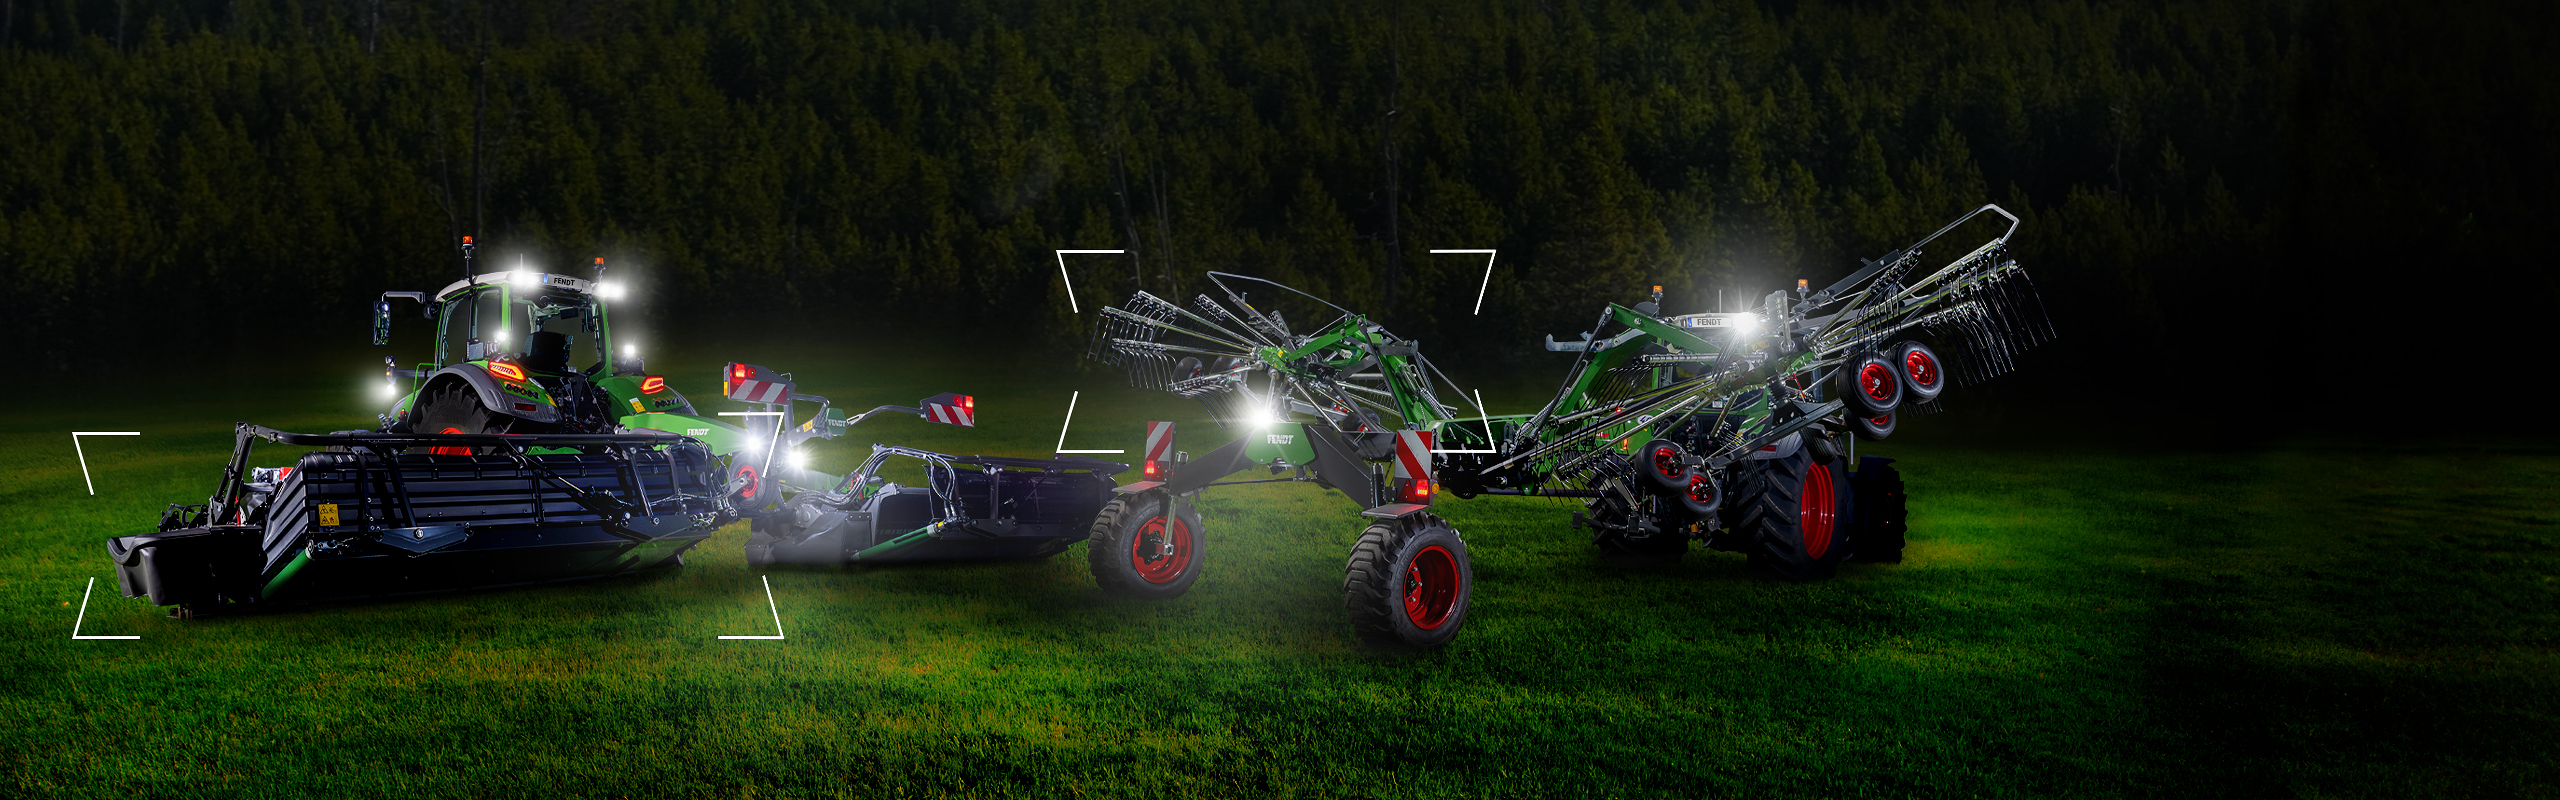 Two tractors with a Fendt Slicer mower and a Fendt Former rake stand in the meadow at dusk and are illuminated.